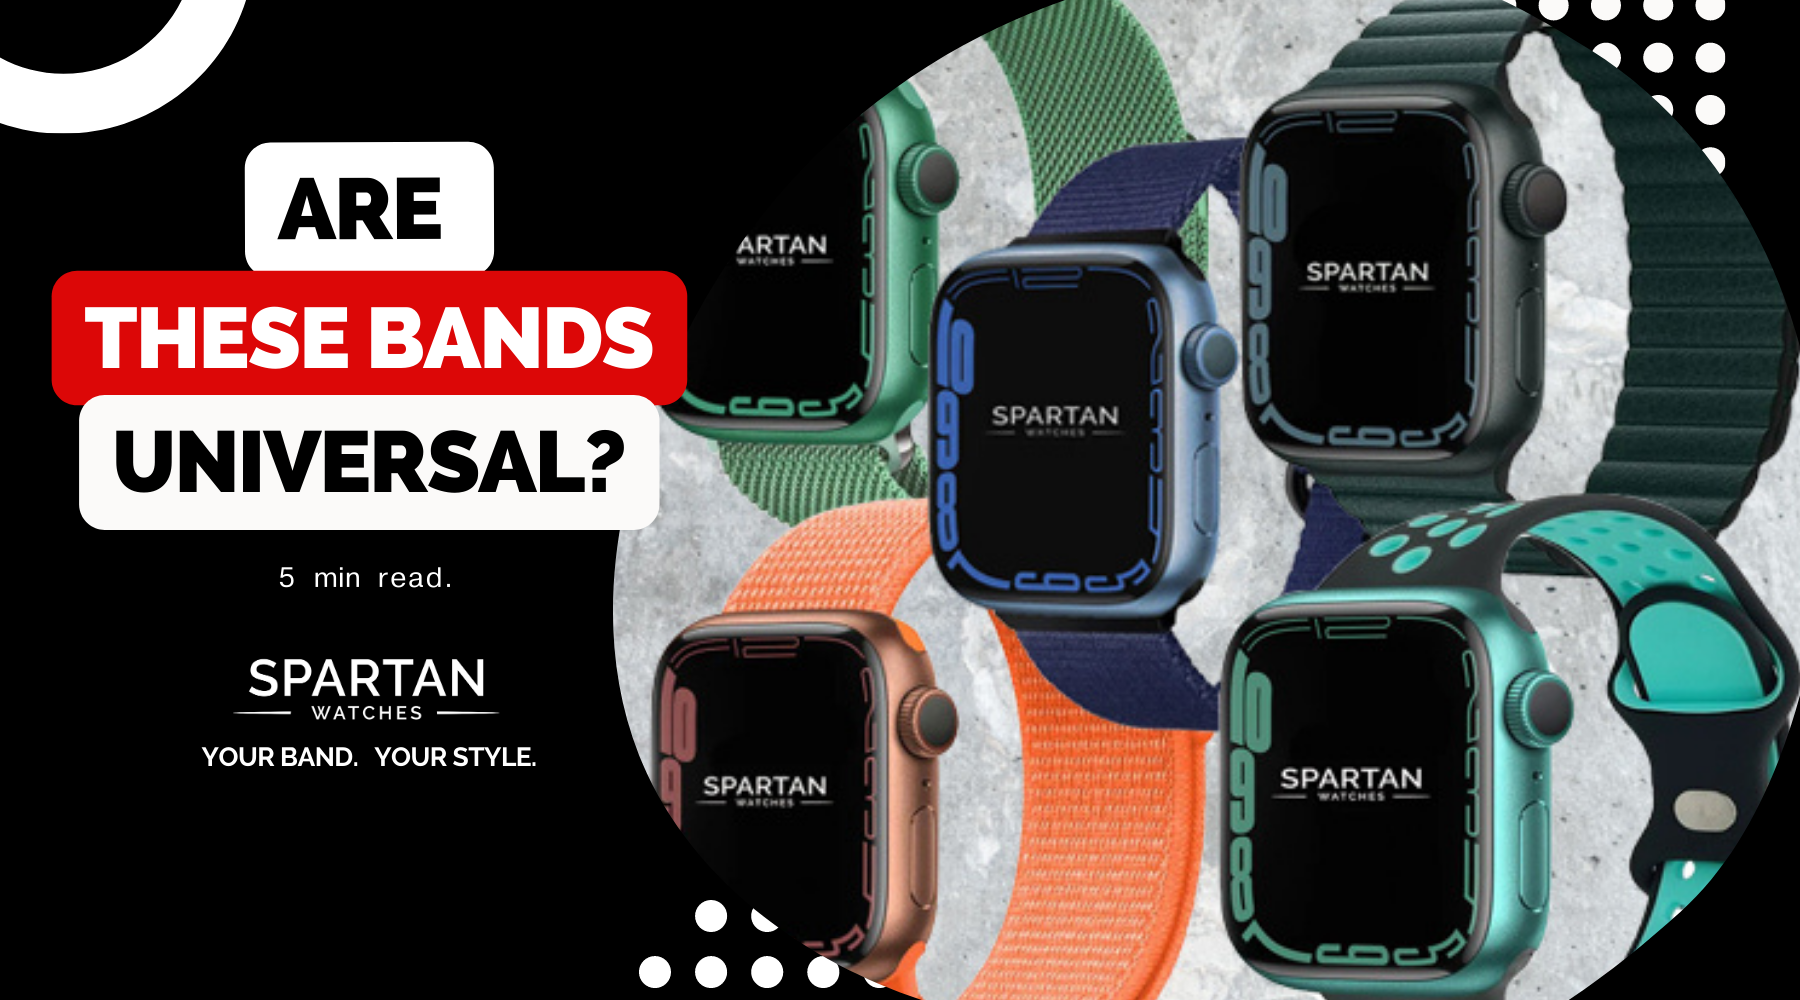 5 smartwatch compatibles con iPhone - Style Blog